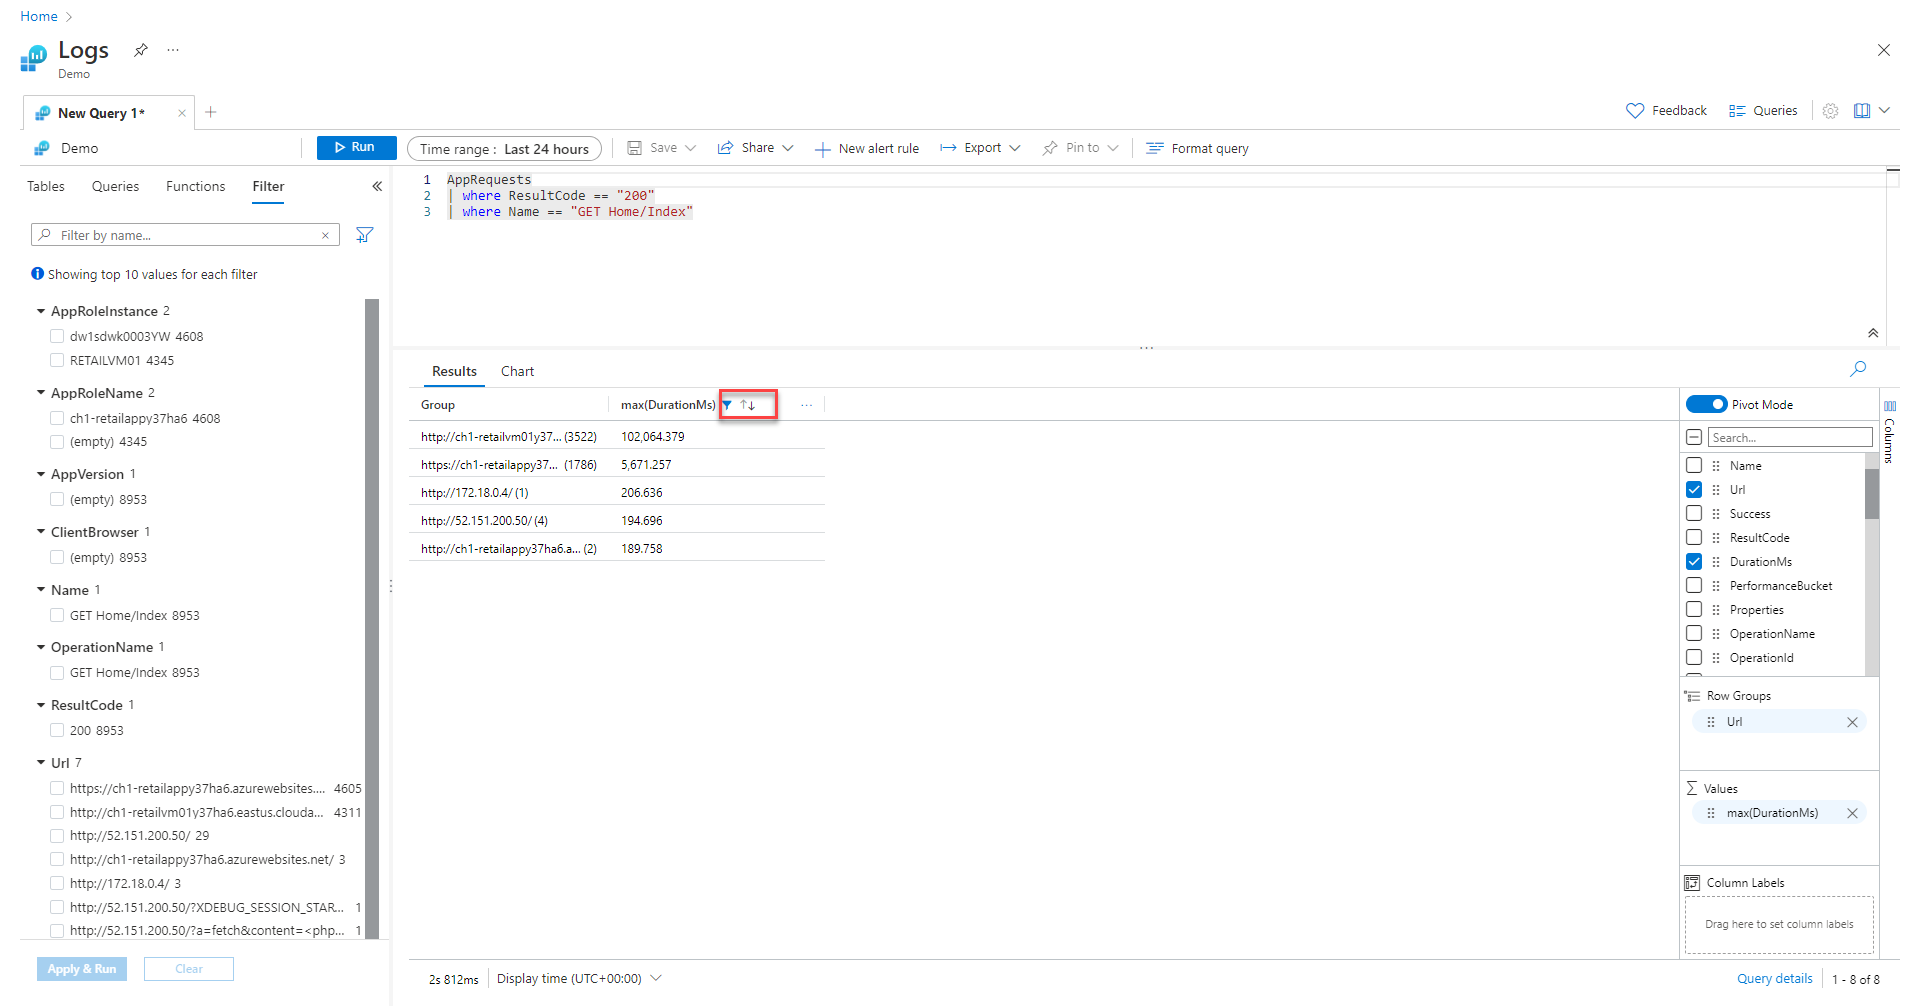 Screenshot that shows the query results pane being sorted by the maximum DurationMS values.